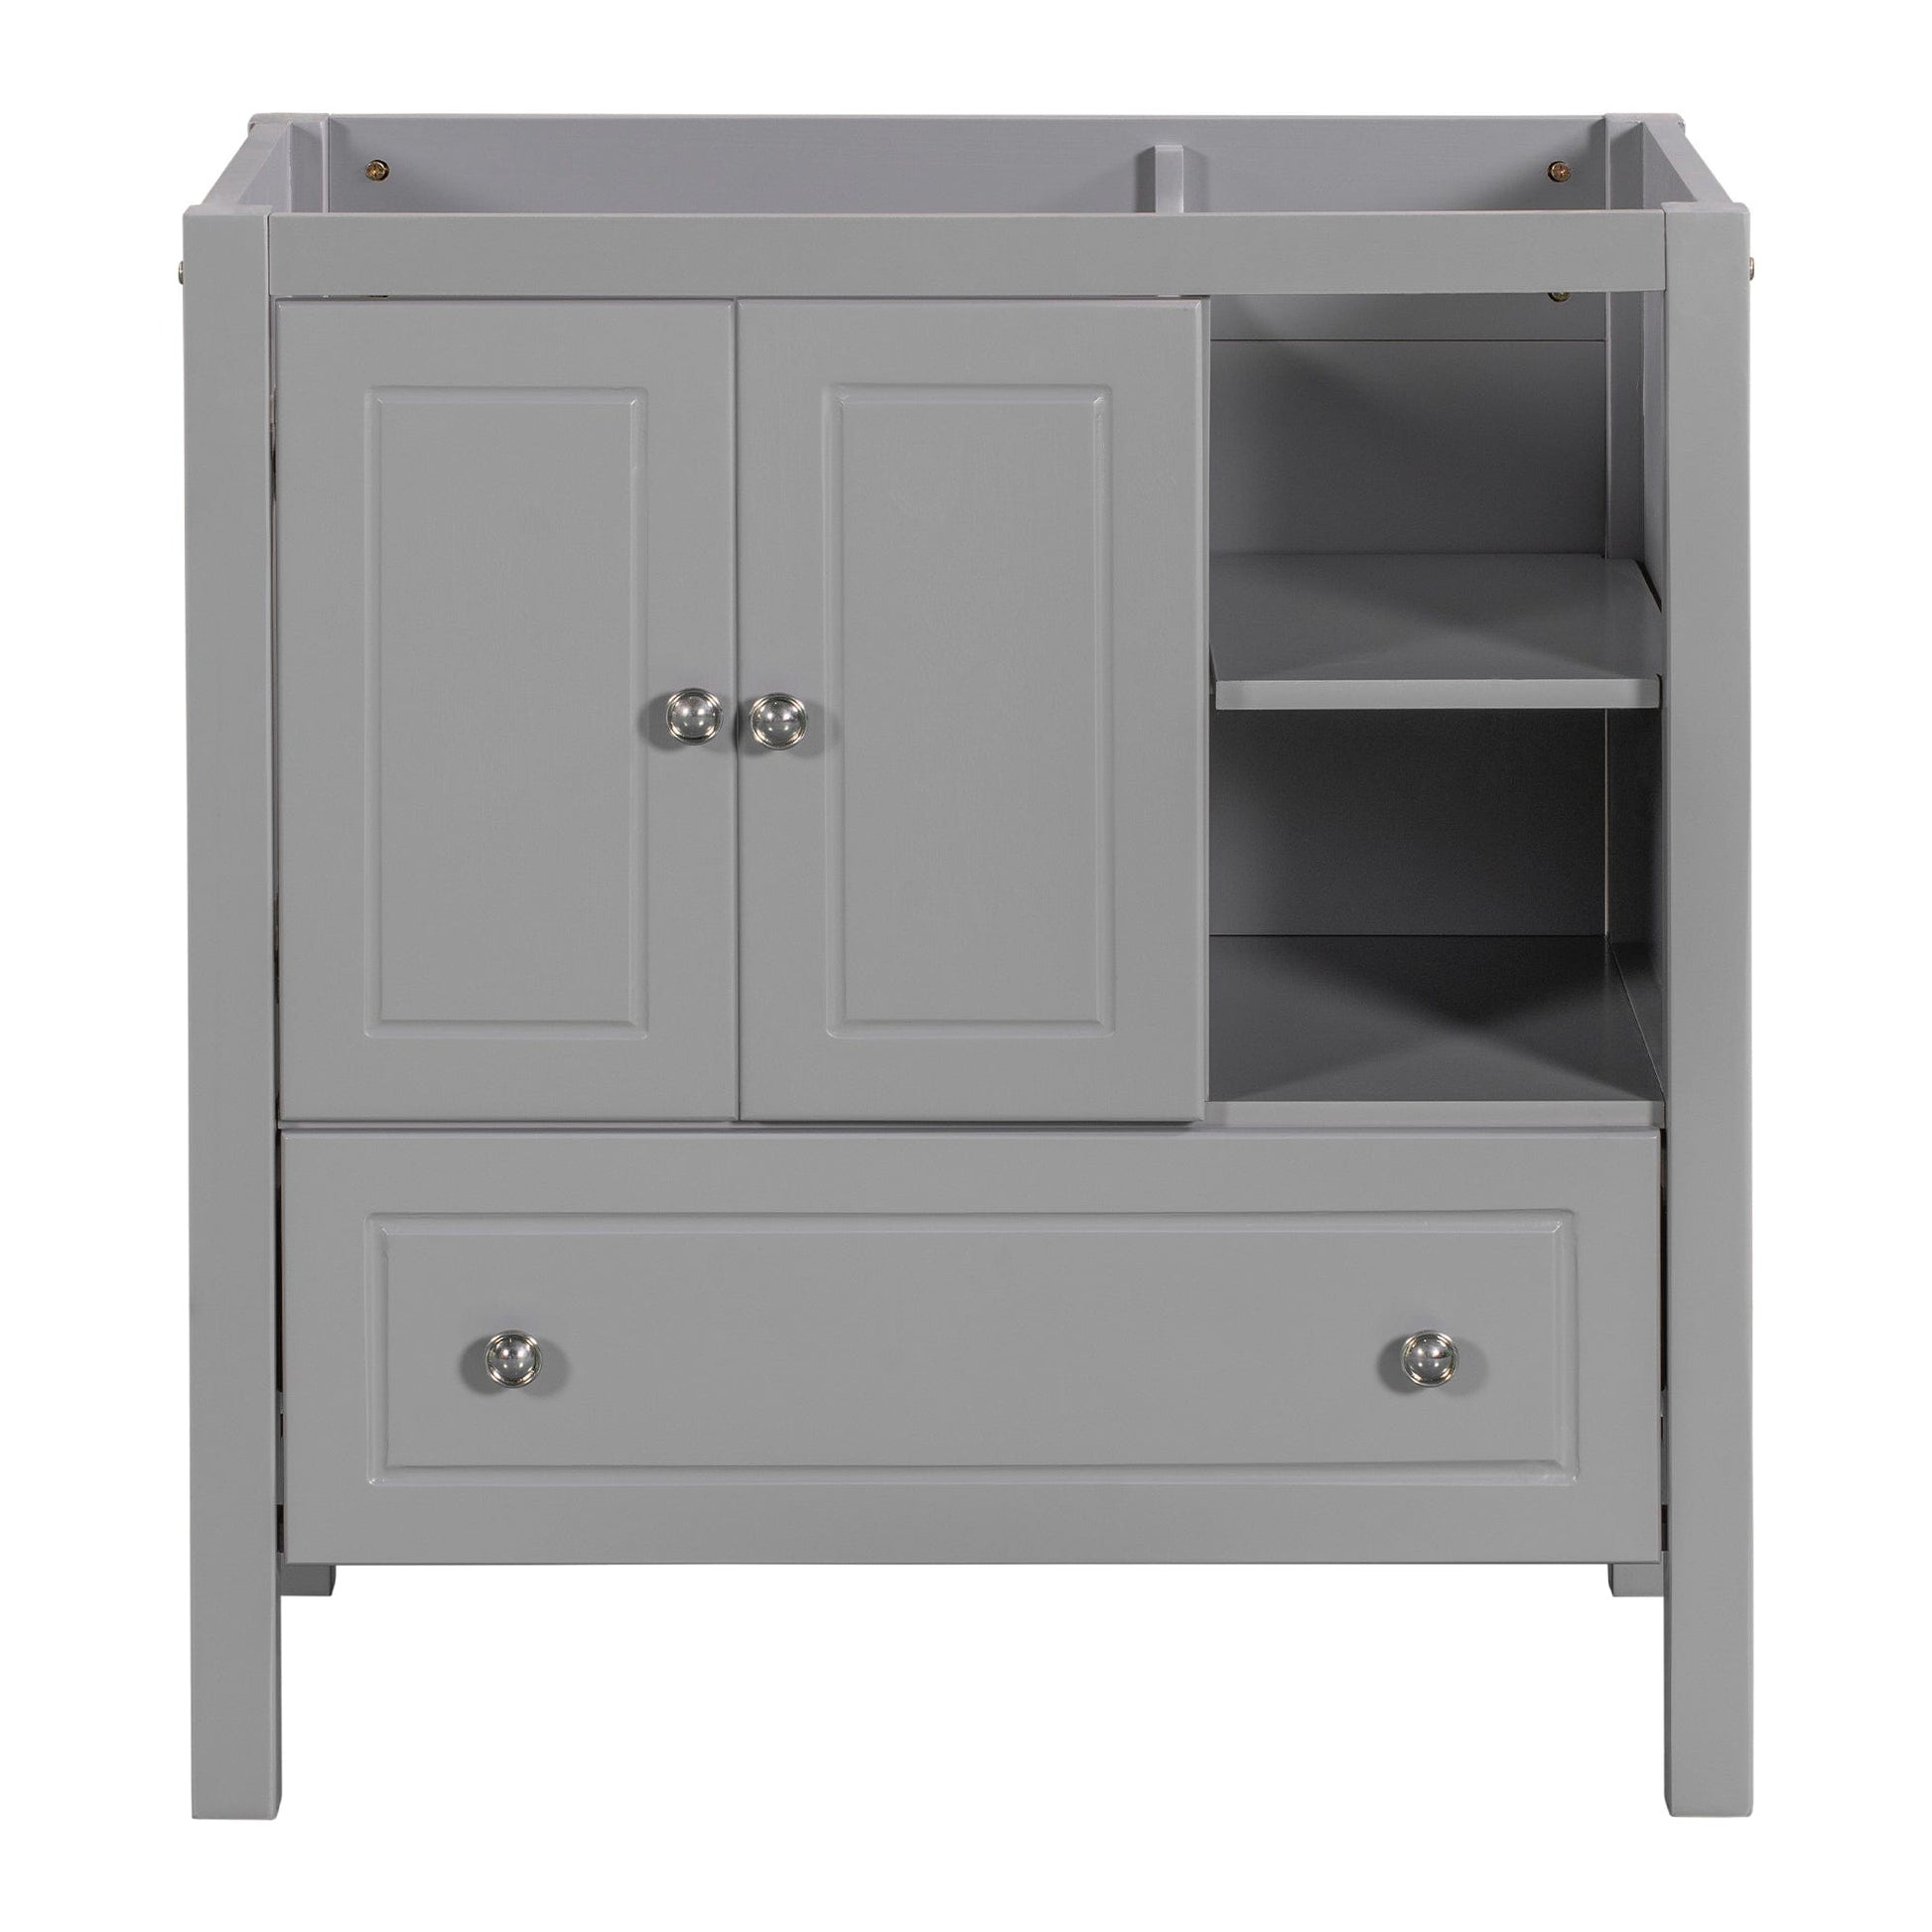 1st Choice Furniture Direct Storage Cabinet 1st Choice Modern Bathroom Cabinet in Grey Finish (Vanity Base Only)